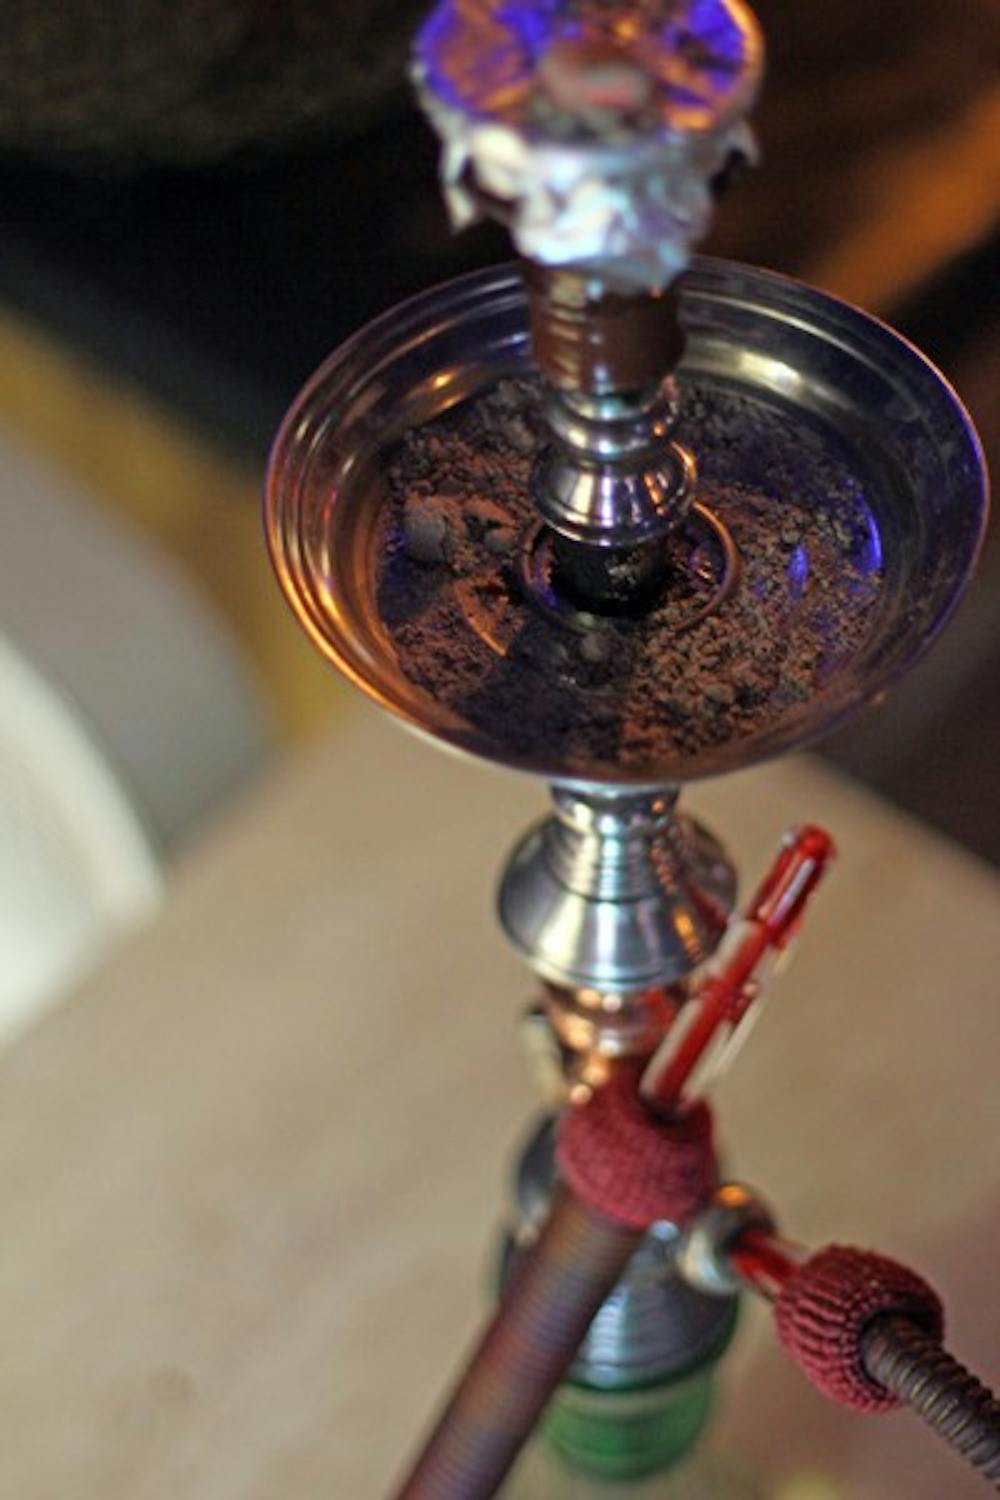 Arizona Representative Kimberly Yee is sponsoring a bill in the House of Representatives that would prohibit minors from purchasing or possessing hookah pipes and hookah due to the health risks attached with smoking.  (Photo by Lisa Bartoli)